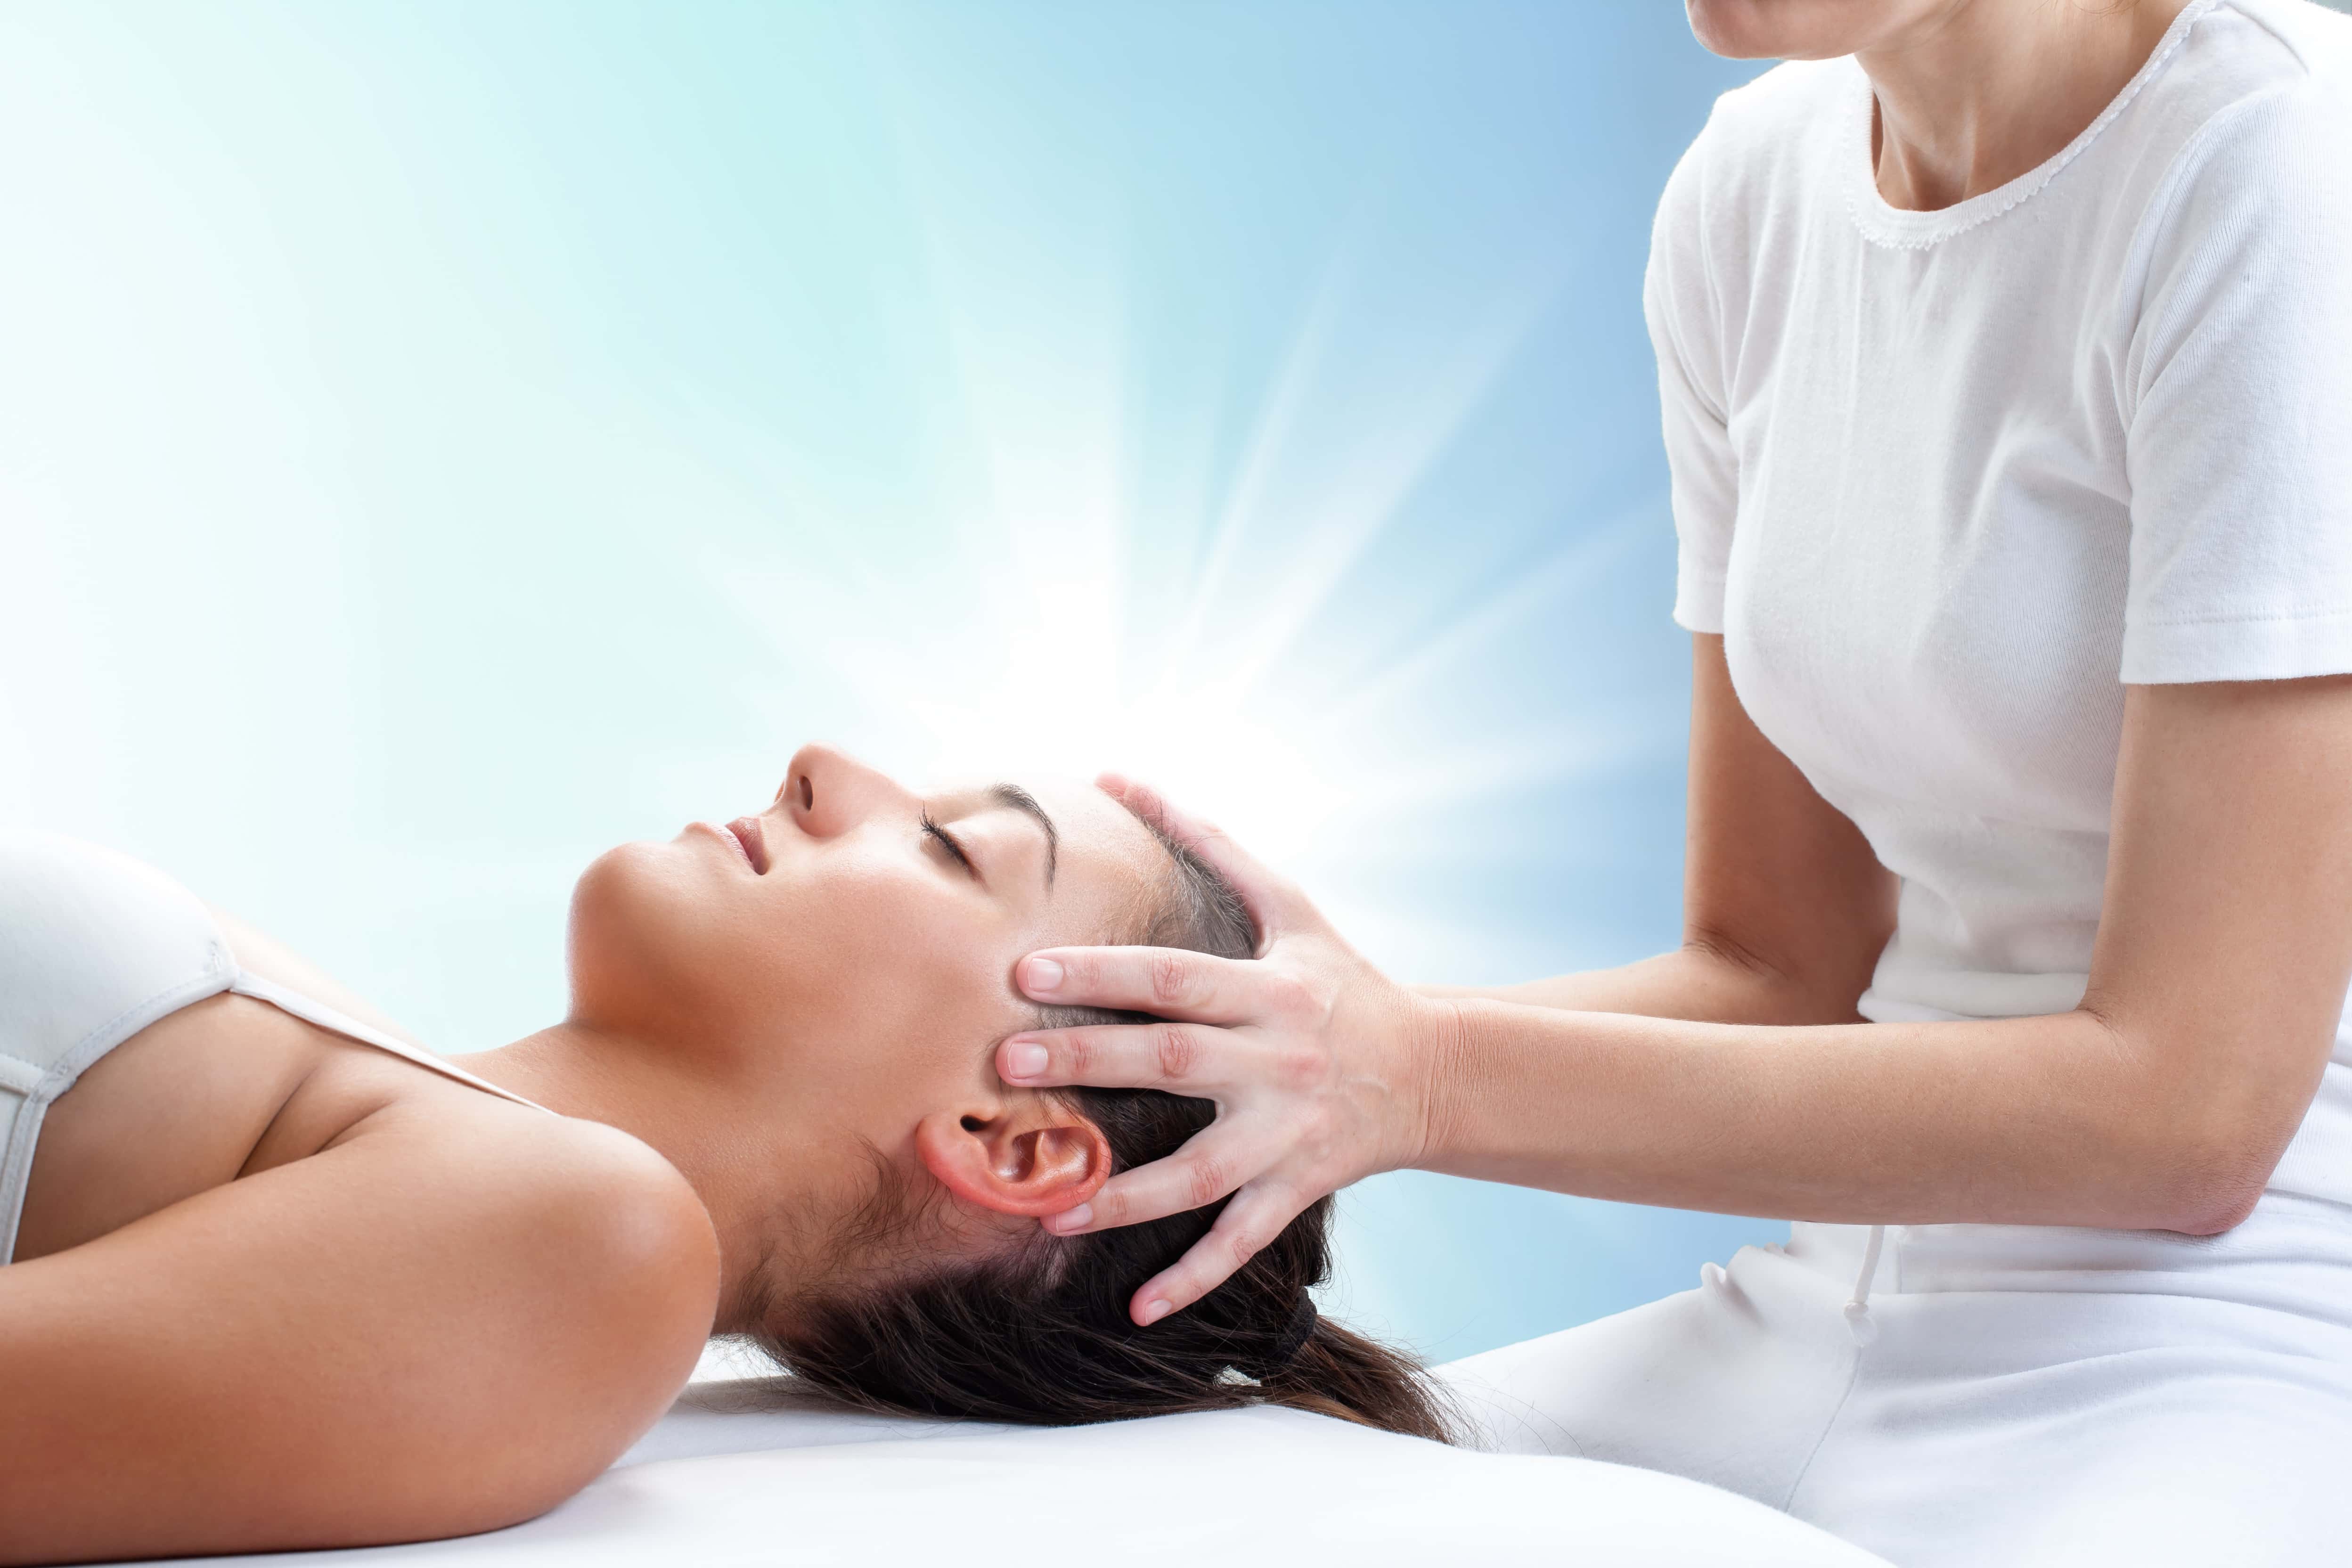 A women perfomring reiki with her hands on another women's head